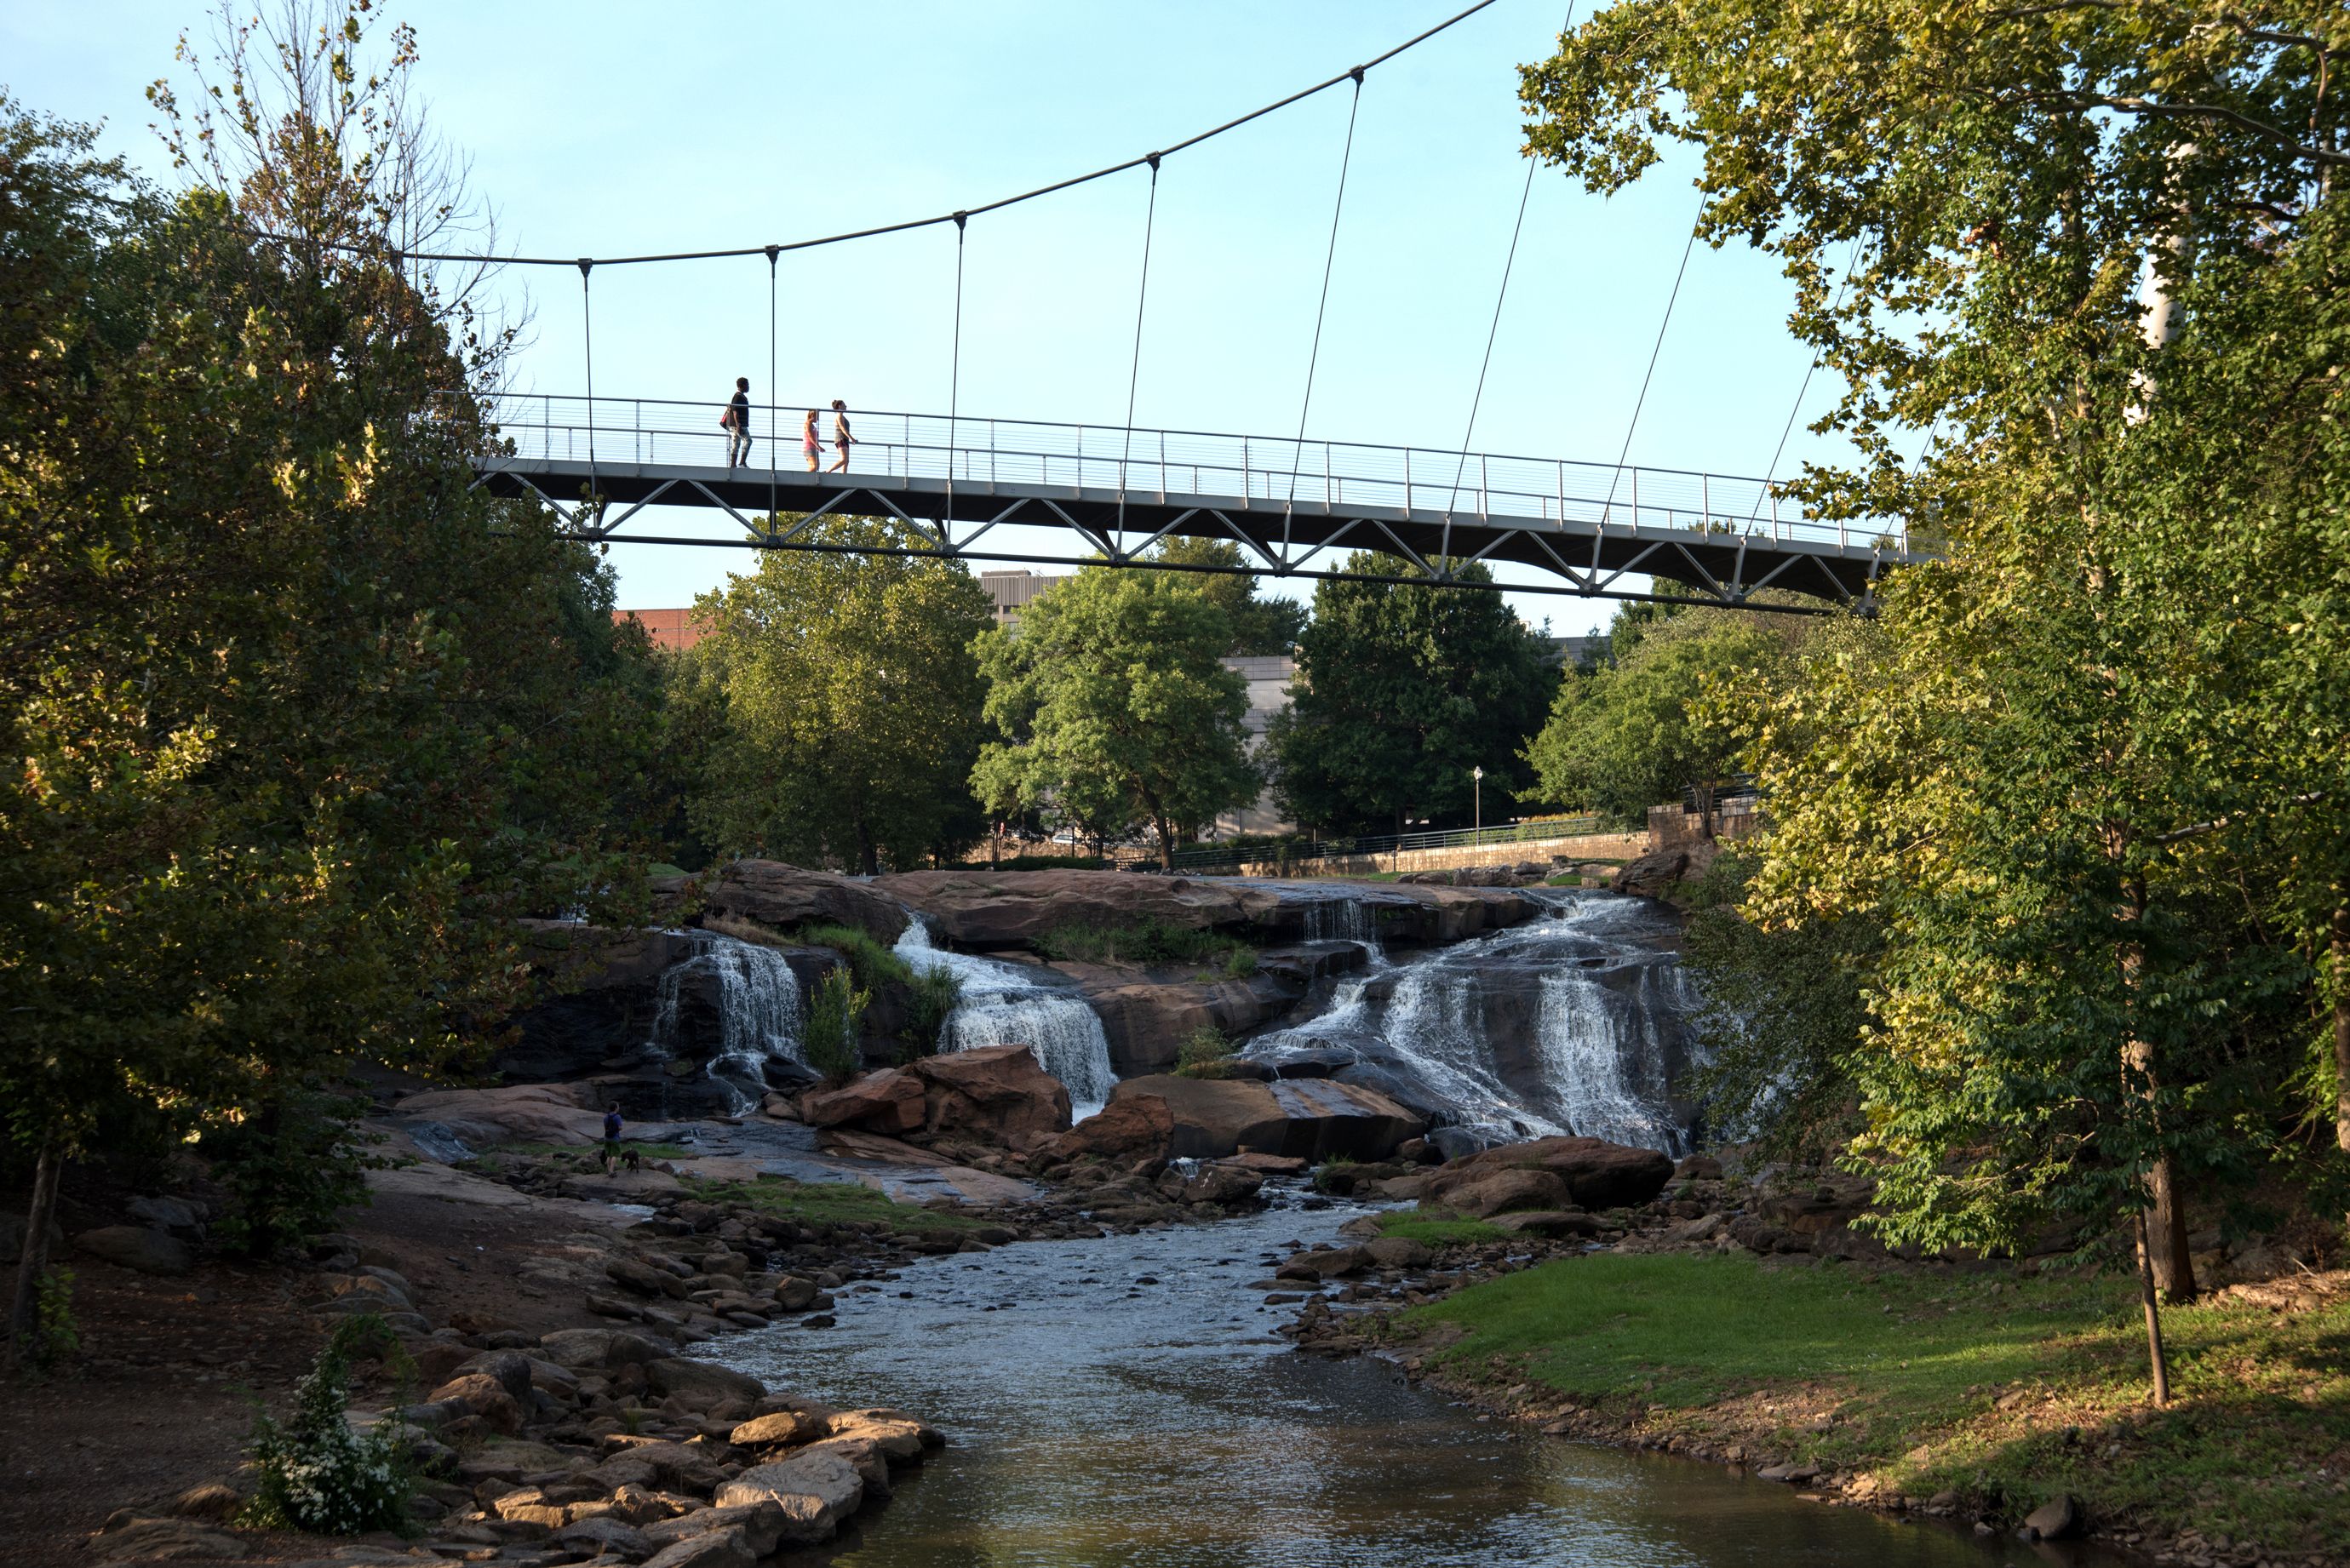 The pedestrian Liberty Bridge spans the Reedy River in downtown Greenville. (10 of 10)